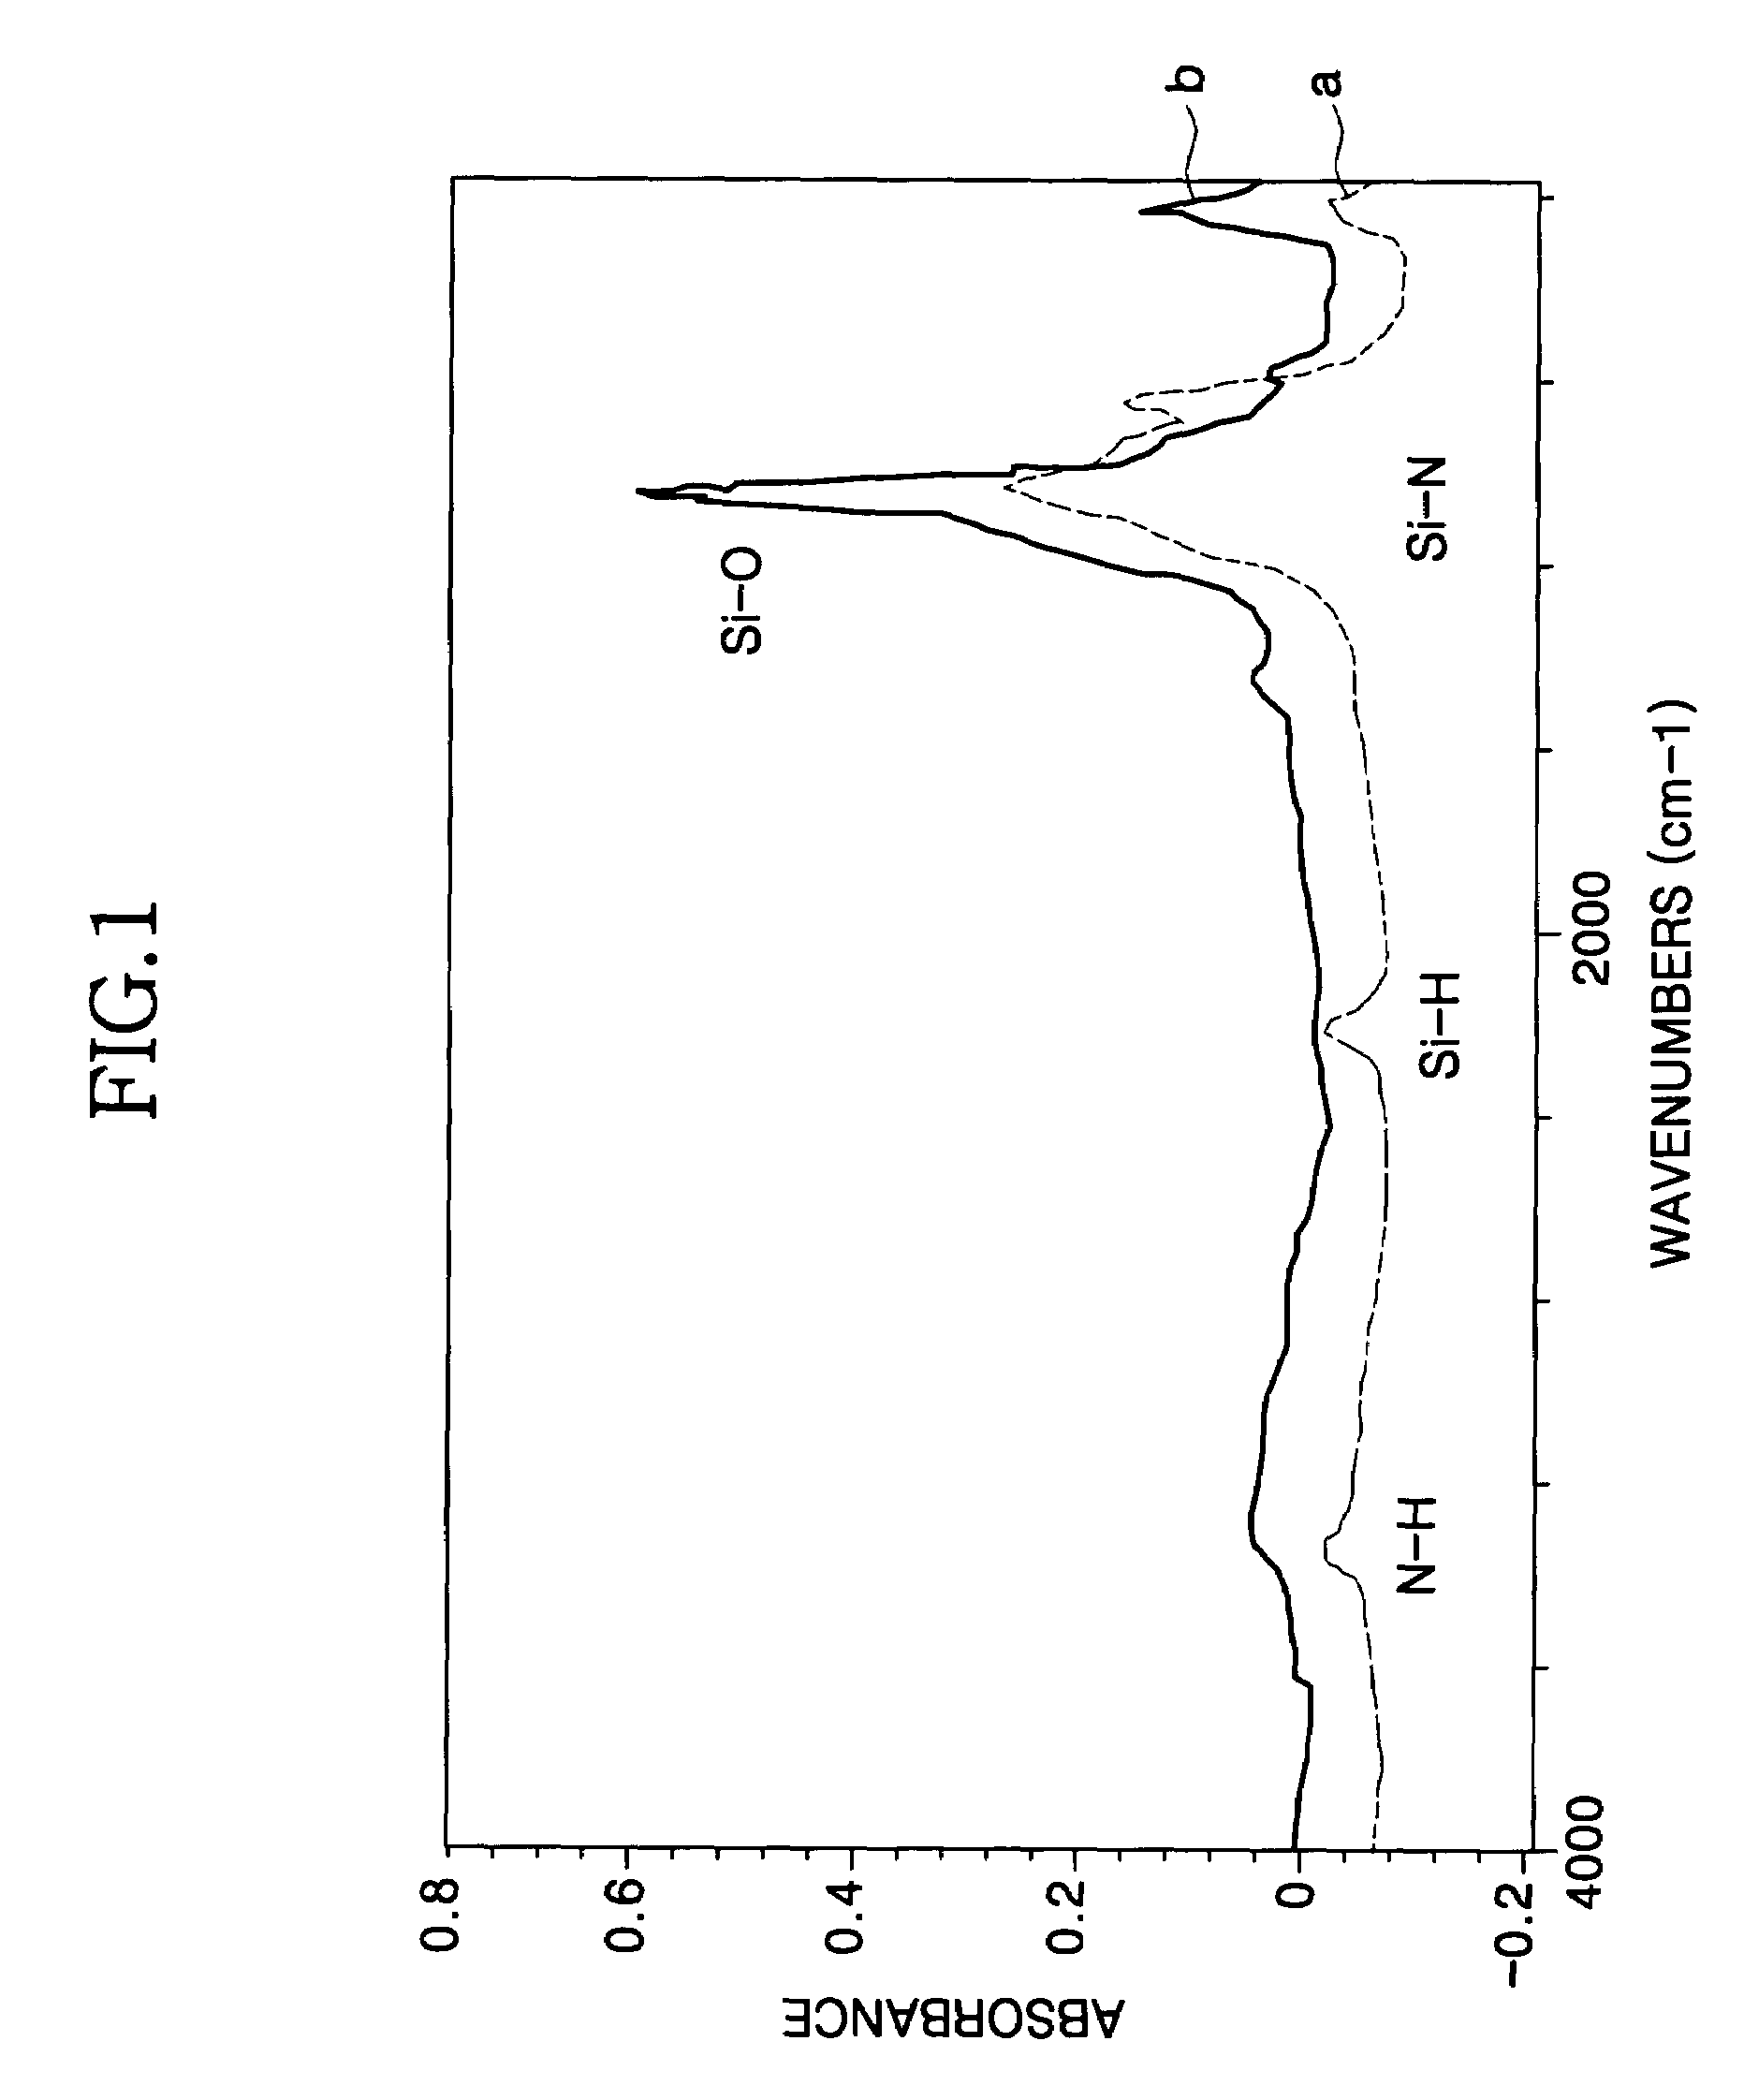 Method for forming a silicon oxide layer using spin-on glass